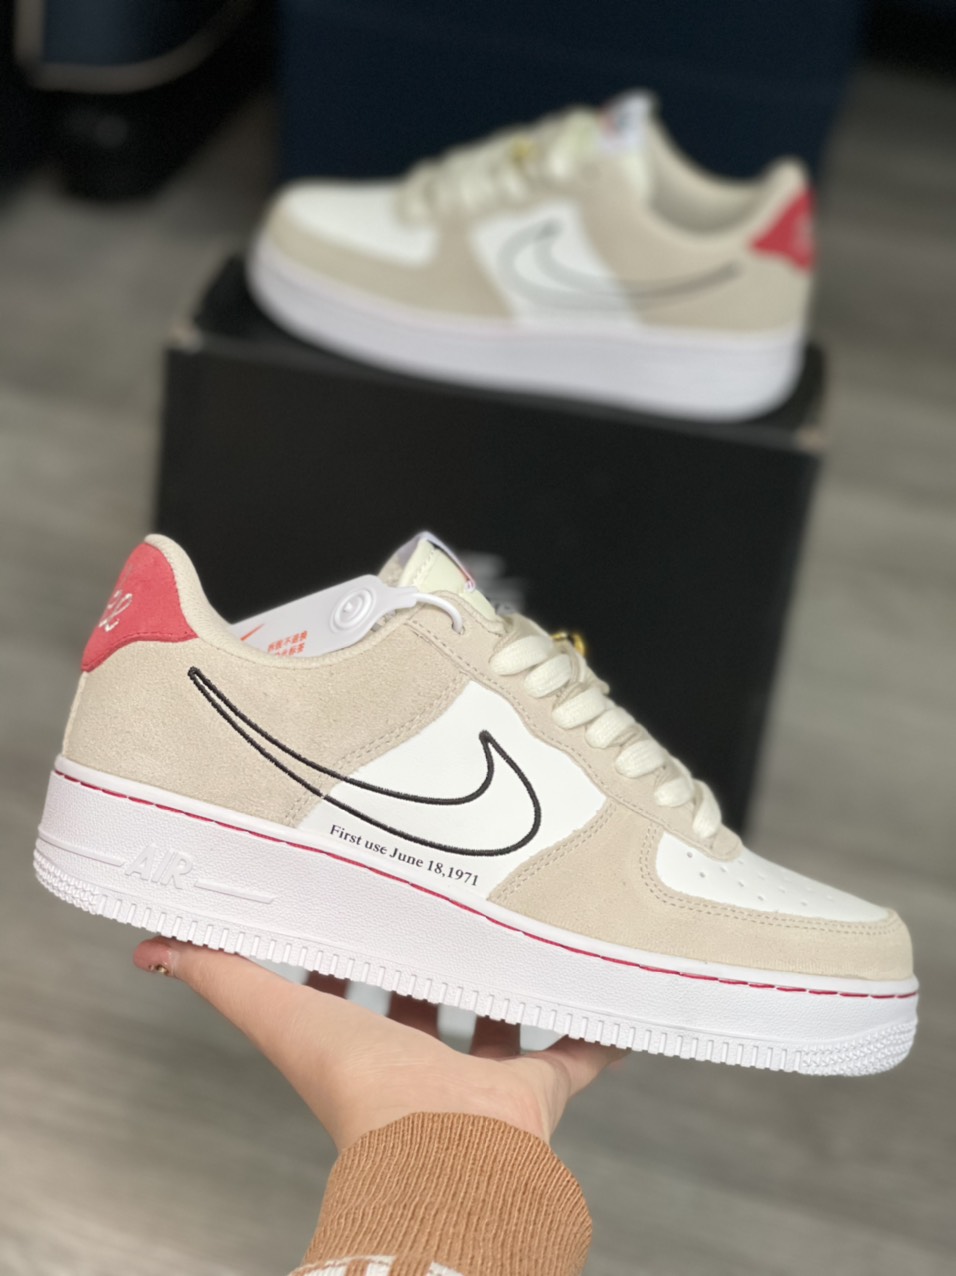 Nike Air Force 1 LV8 First Use Like Auth